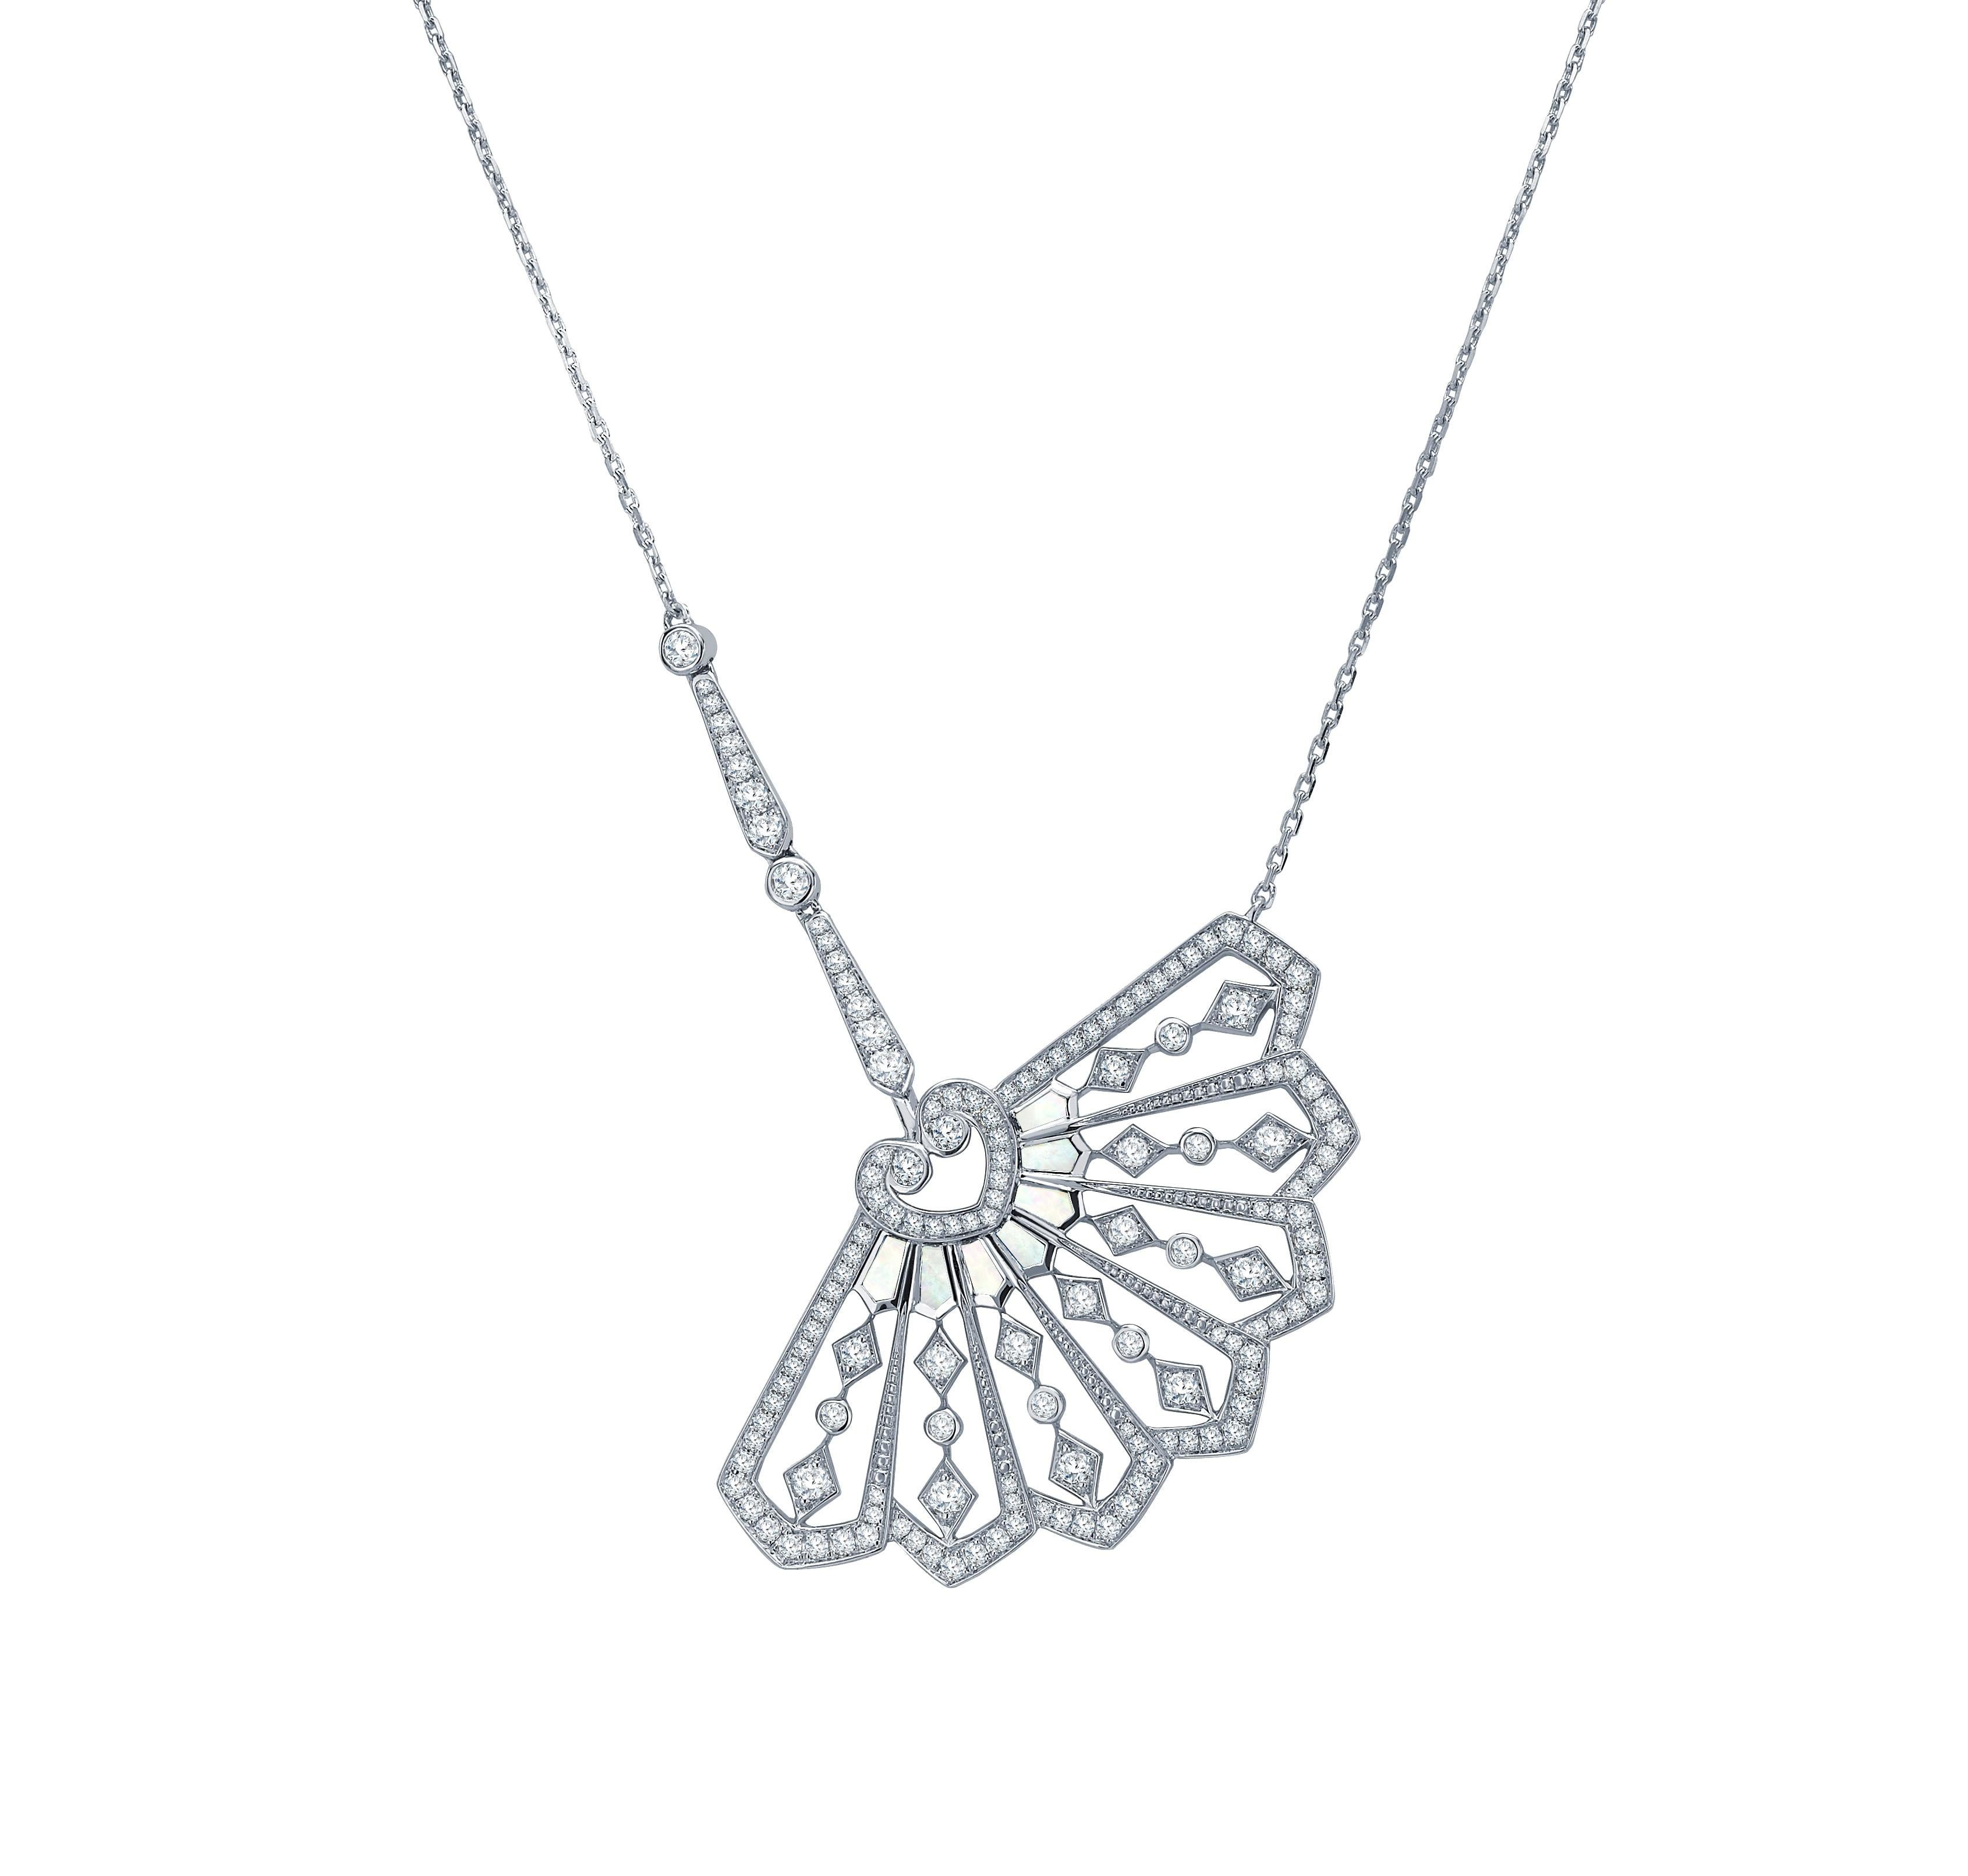 A House of Garrard 18 karat white gold pendant from the Fanfare collection set with 143 round white diamonds weighing 1.29 carats and 7 calibre cut mother of pearl weighing 0.24 carats. The total length of the pendant is 42cm. 
143 round white